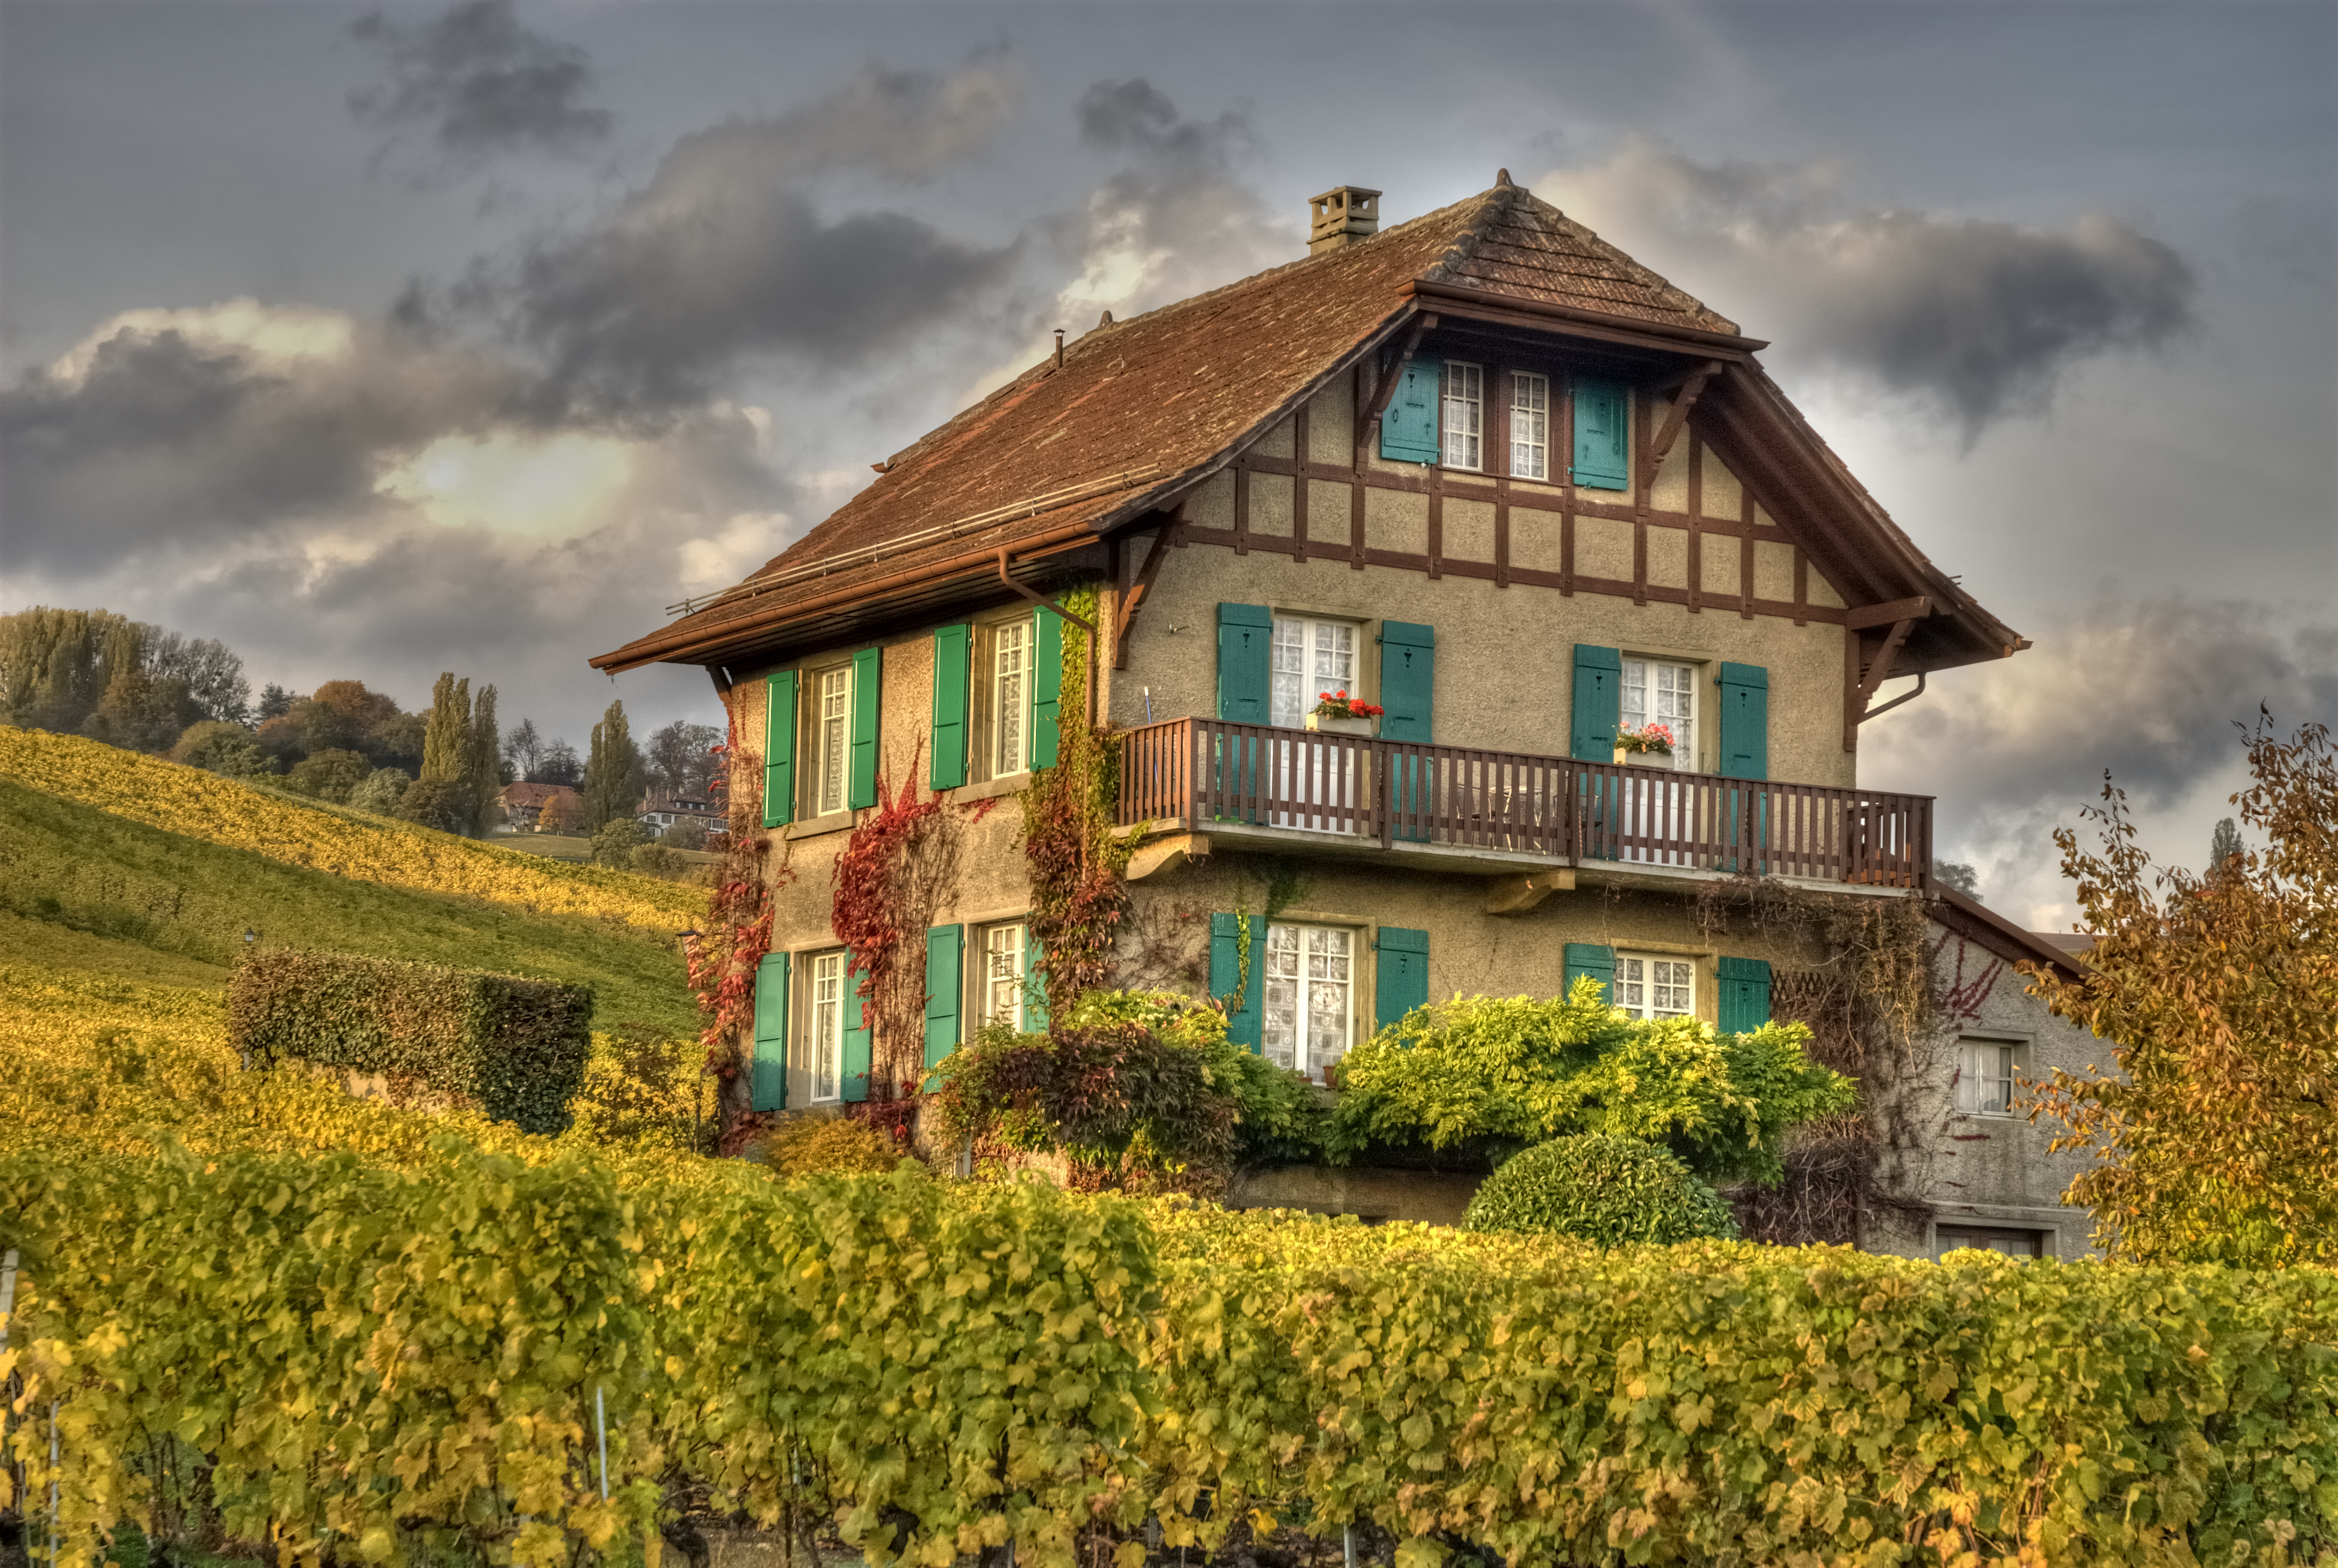 man made, house, country, field, vineyard